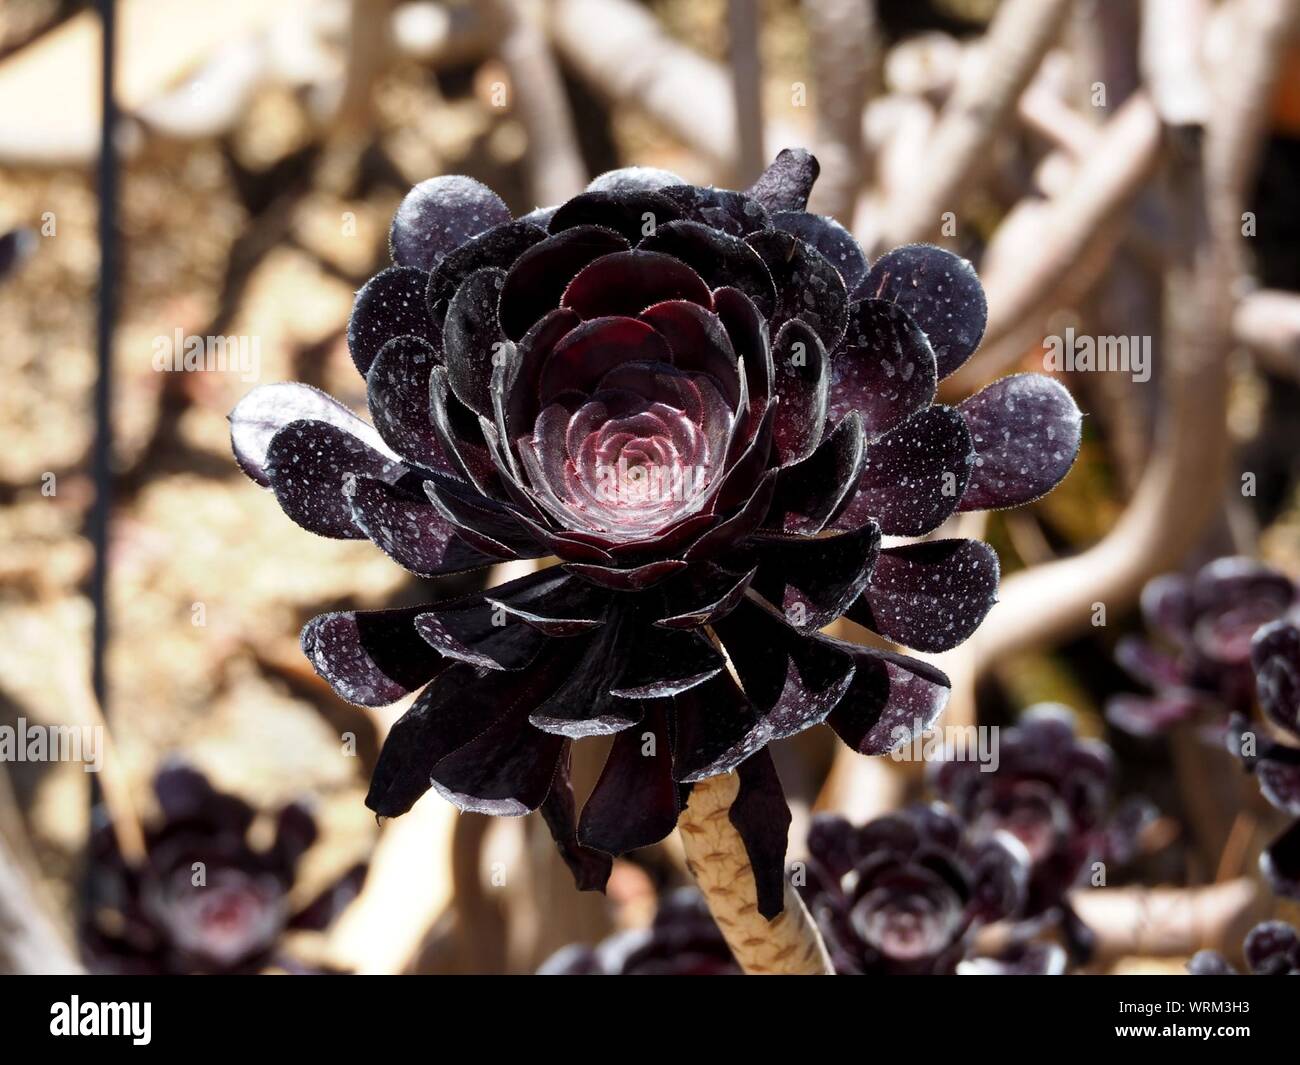 High Angle View Of Aeonium Arboreum Growing Outdoors Stock Photo